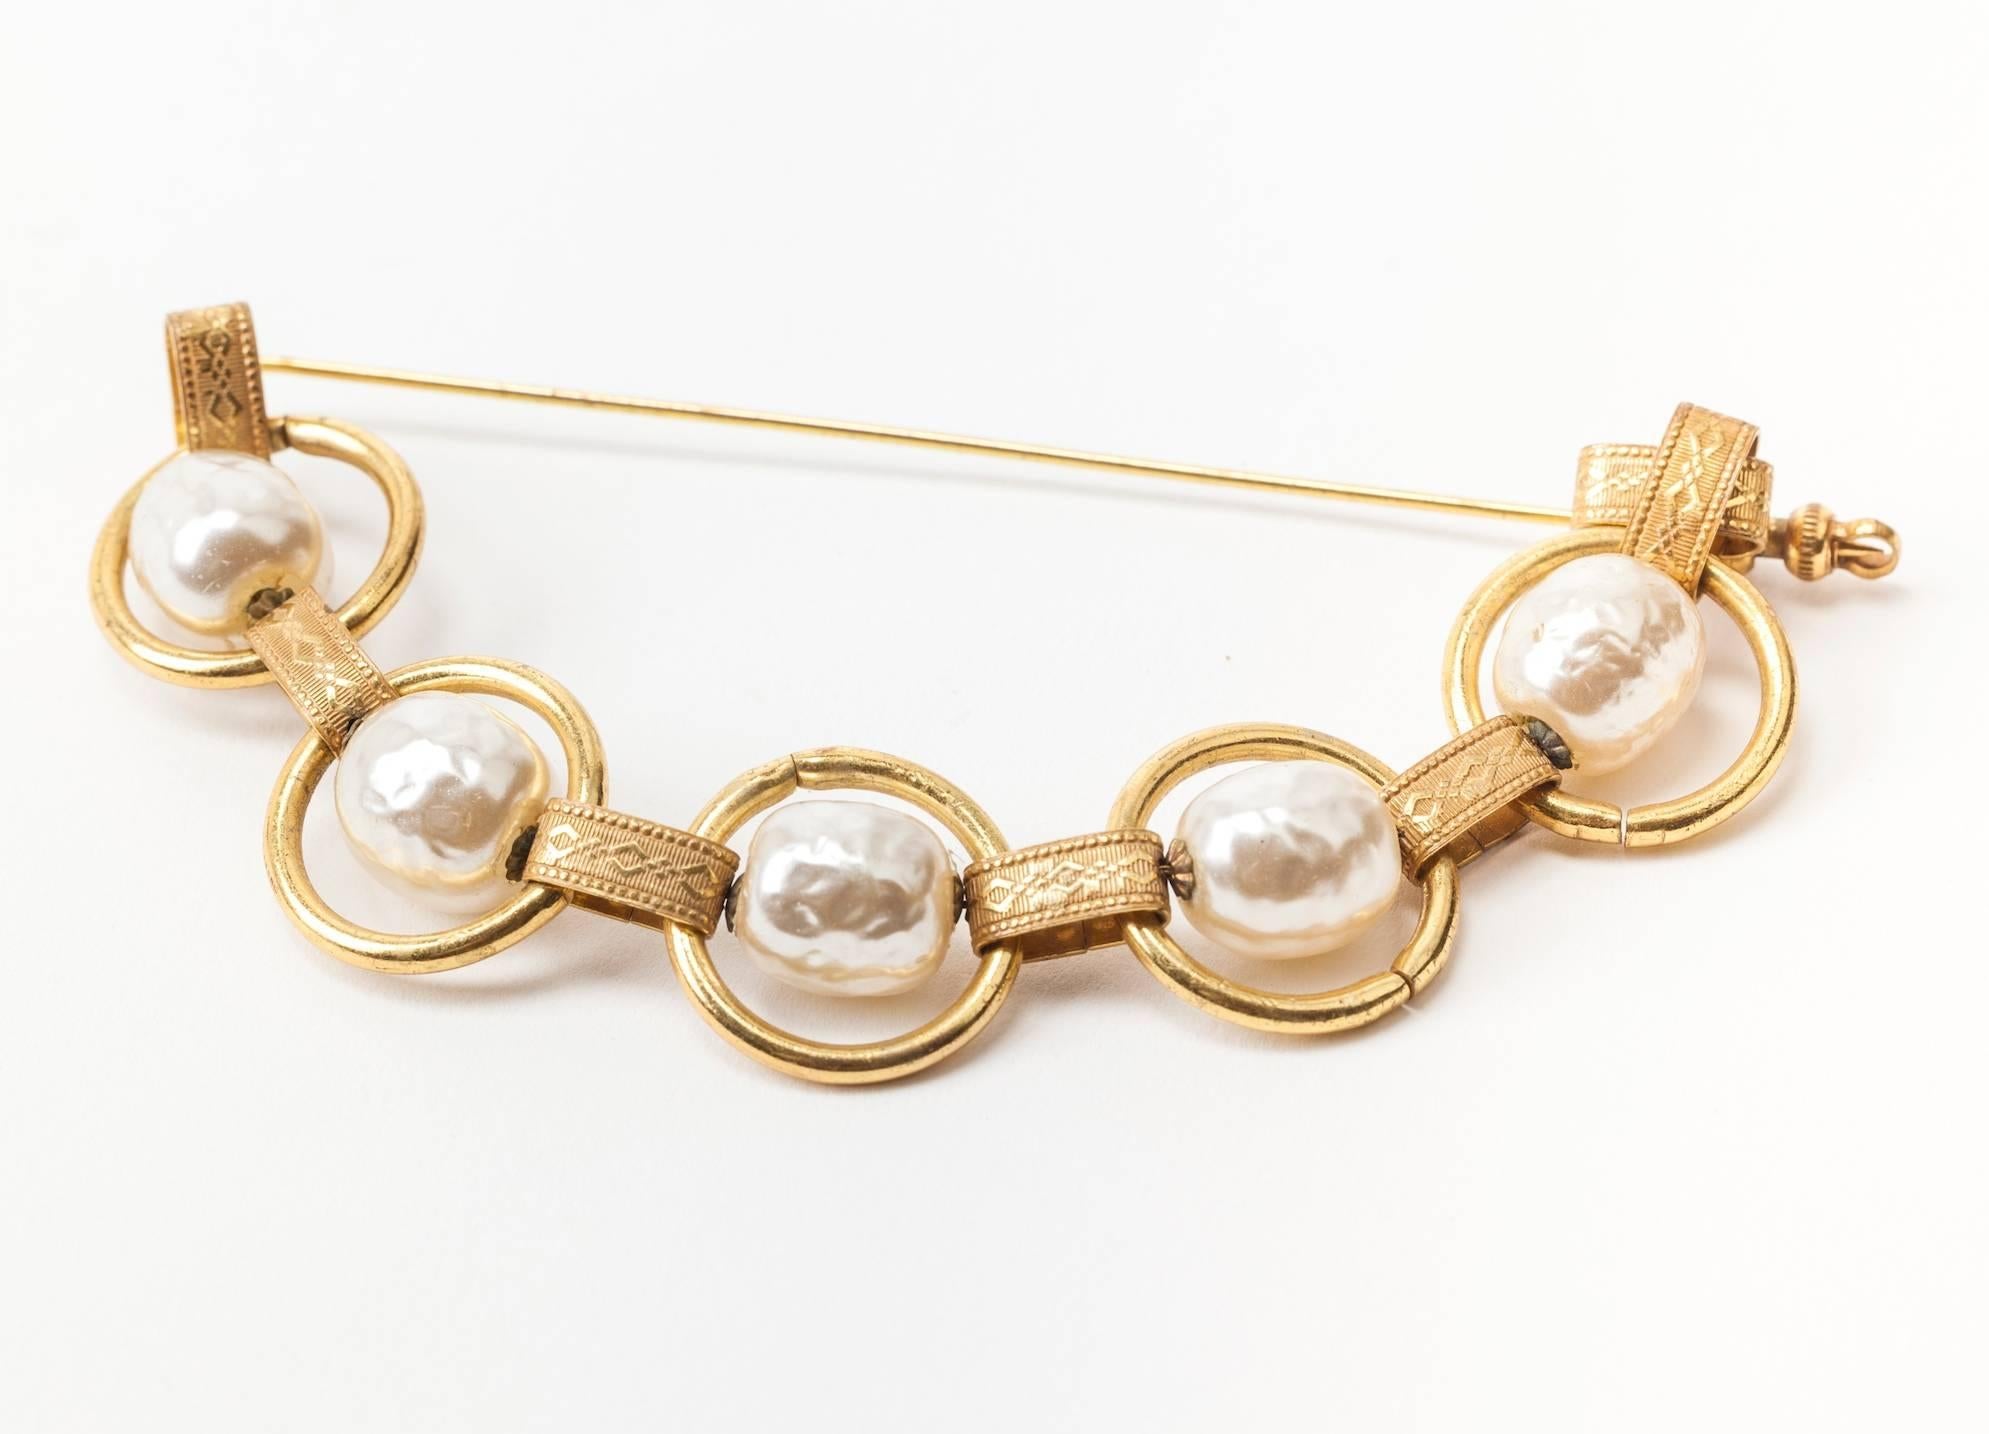 Unusual, large two part stickpin brooch by Miriam Haskell of signature large baroque pearls and elaborate Russian gilt chain link. Stickpin disappears in fabric when worn. 1950's USA. Excellent condition.